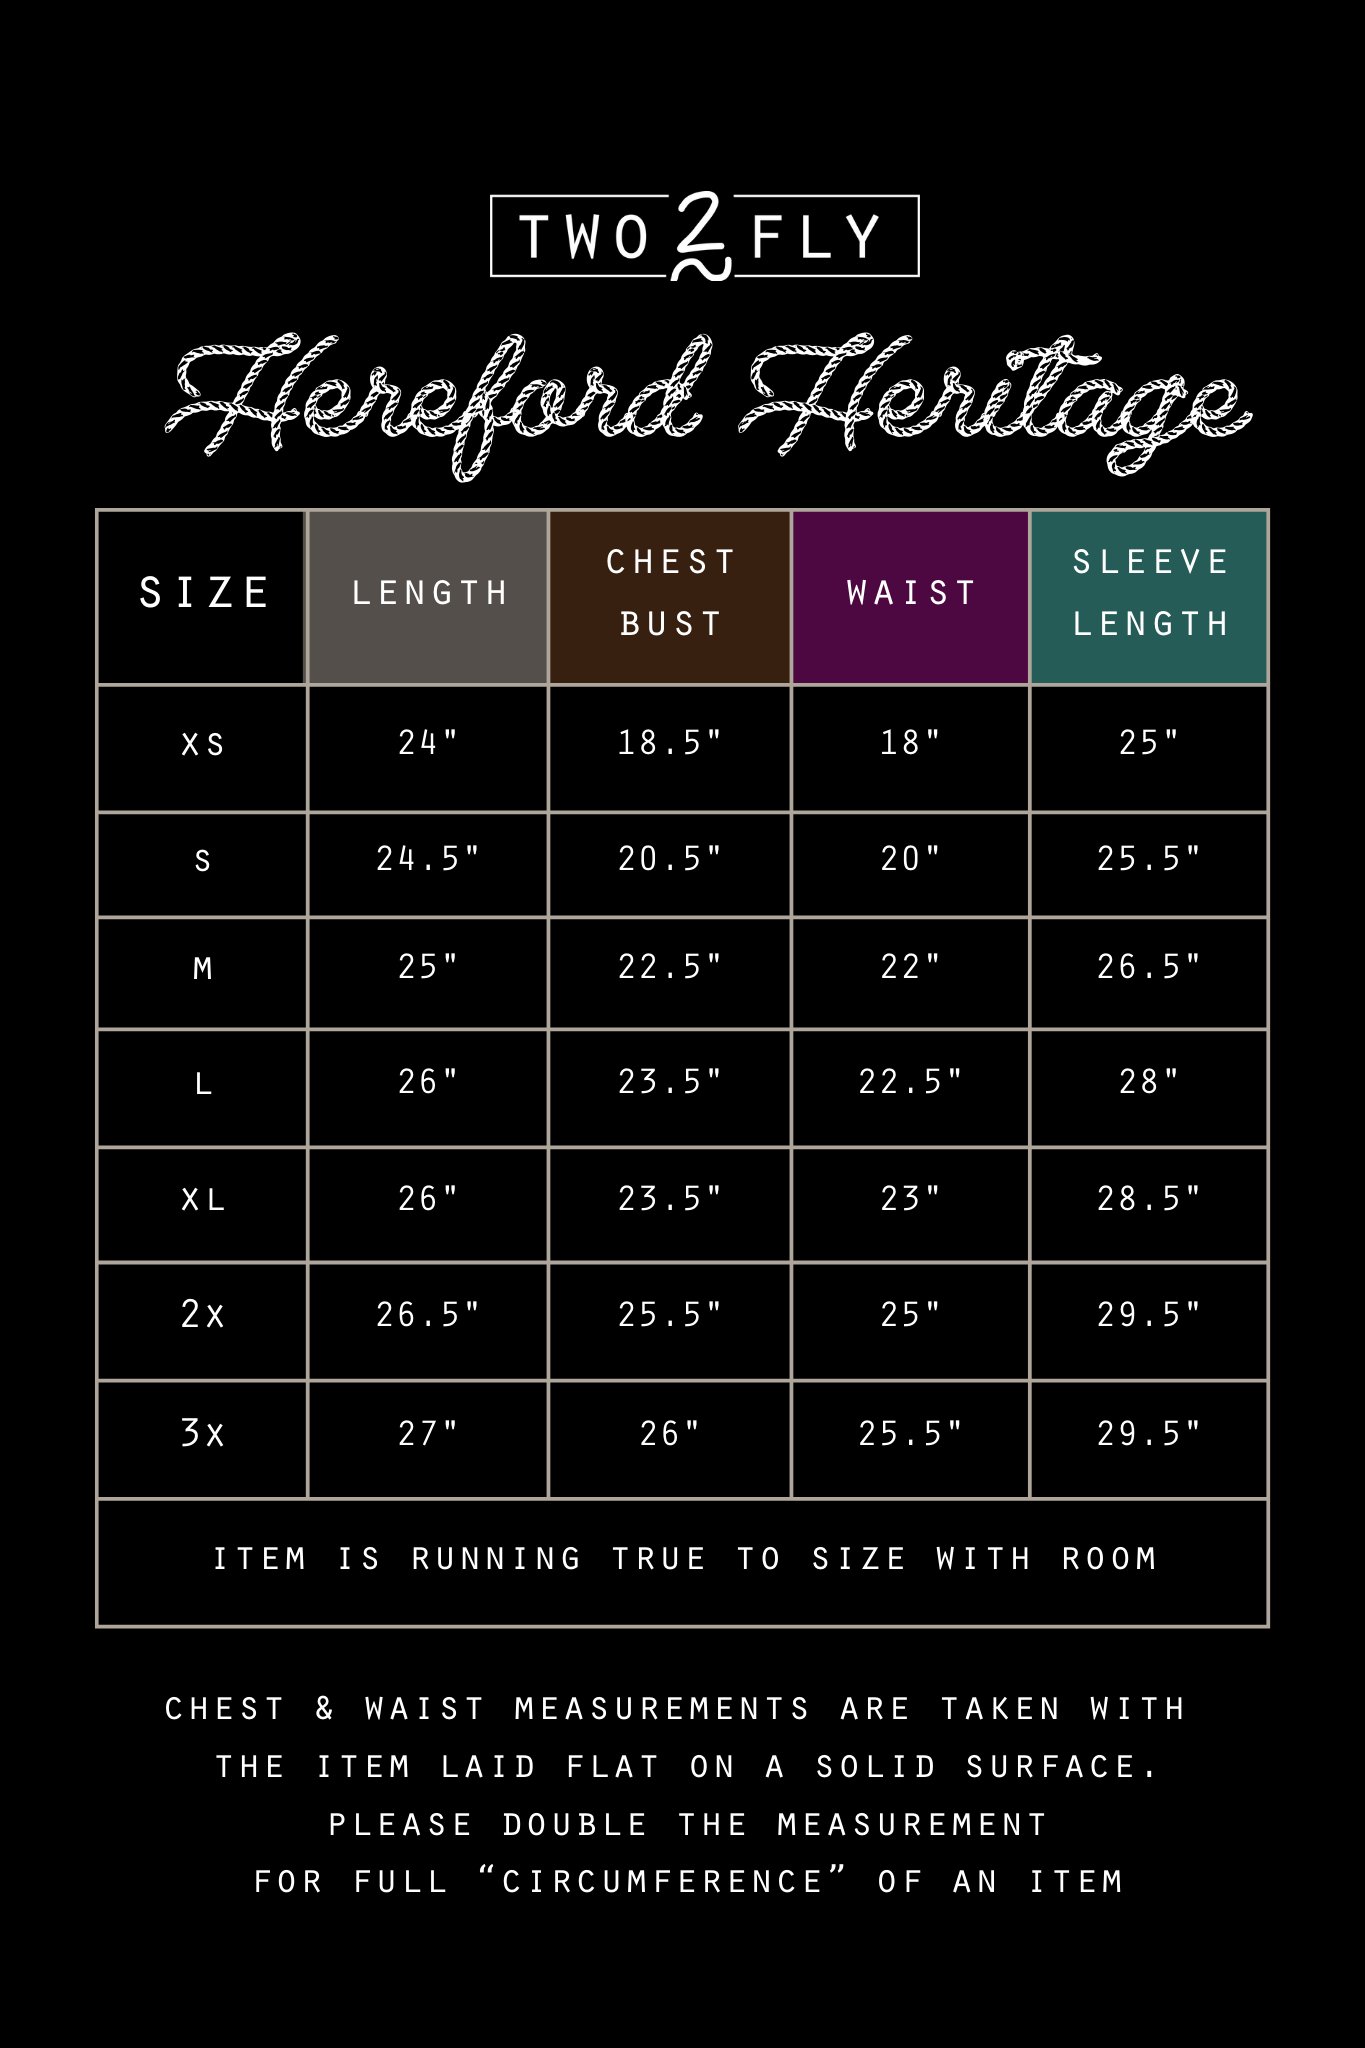 HEREFORD HERITAGE [missing sizes]